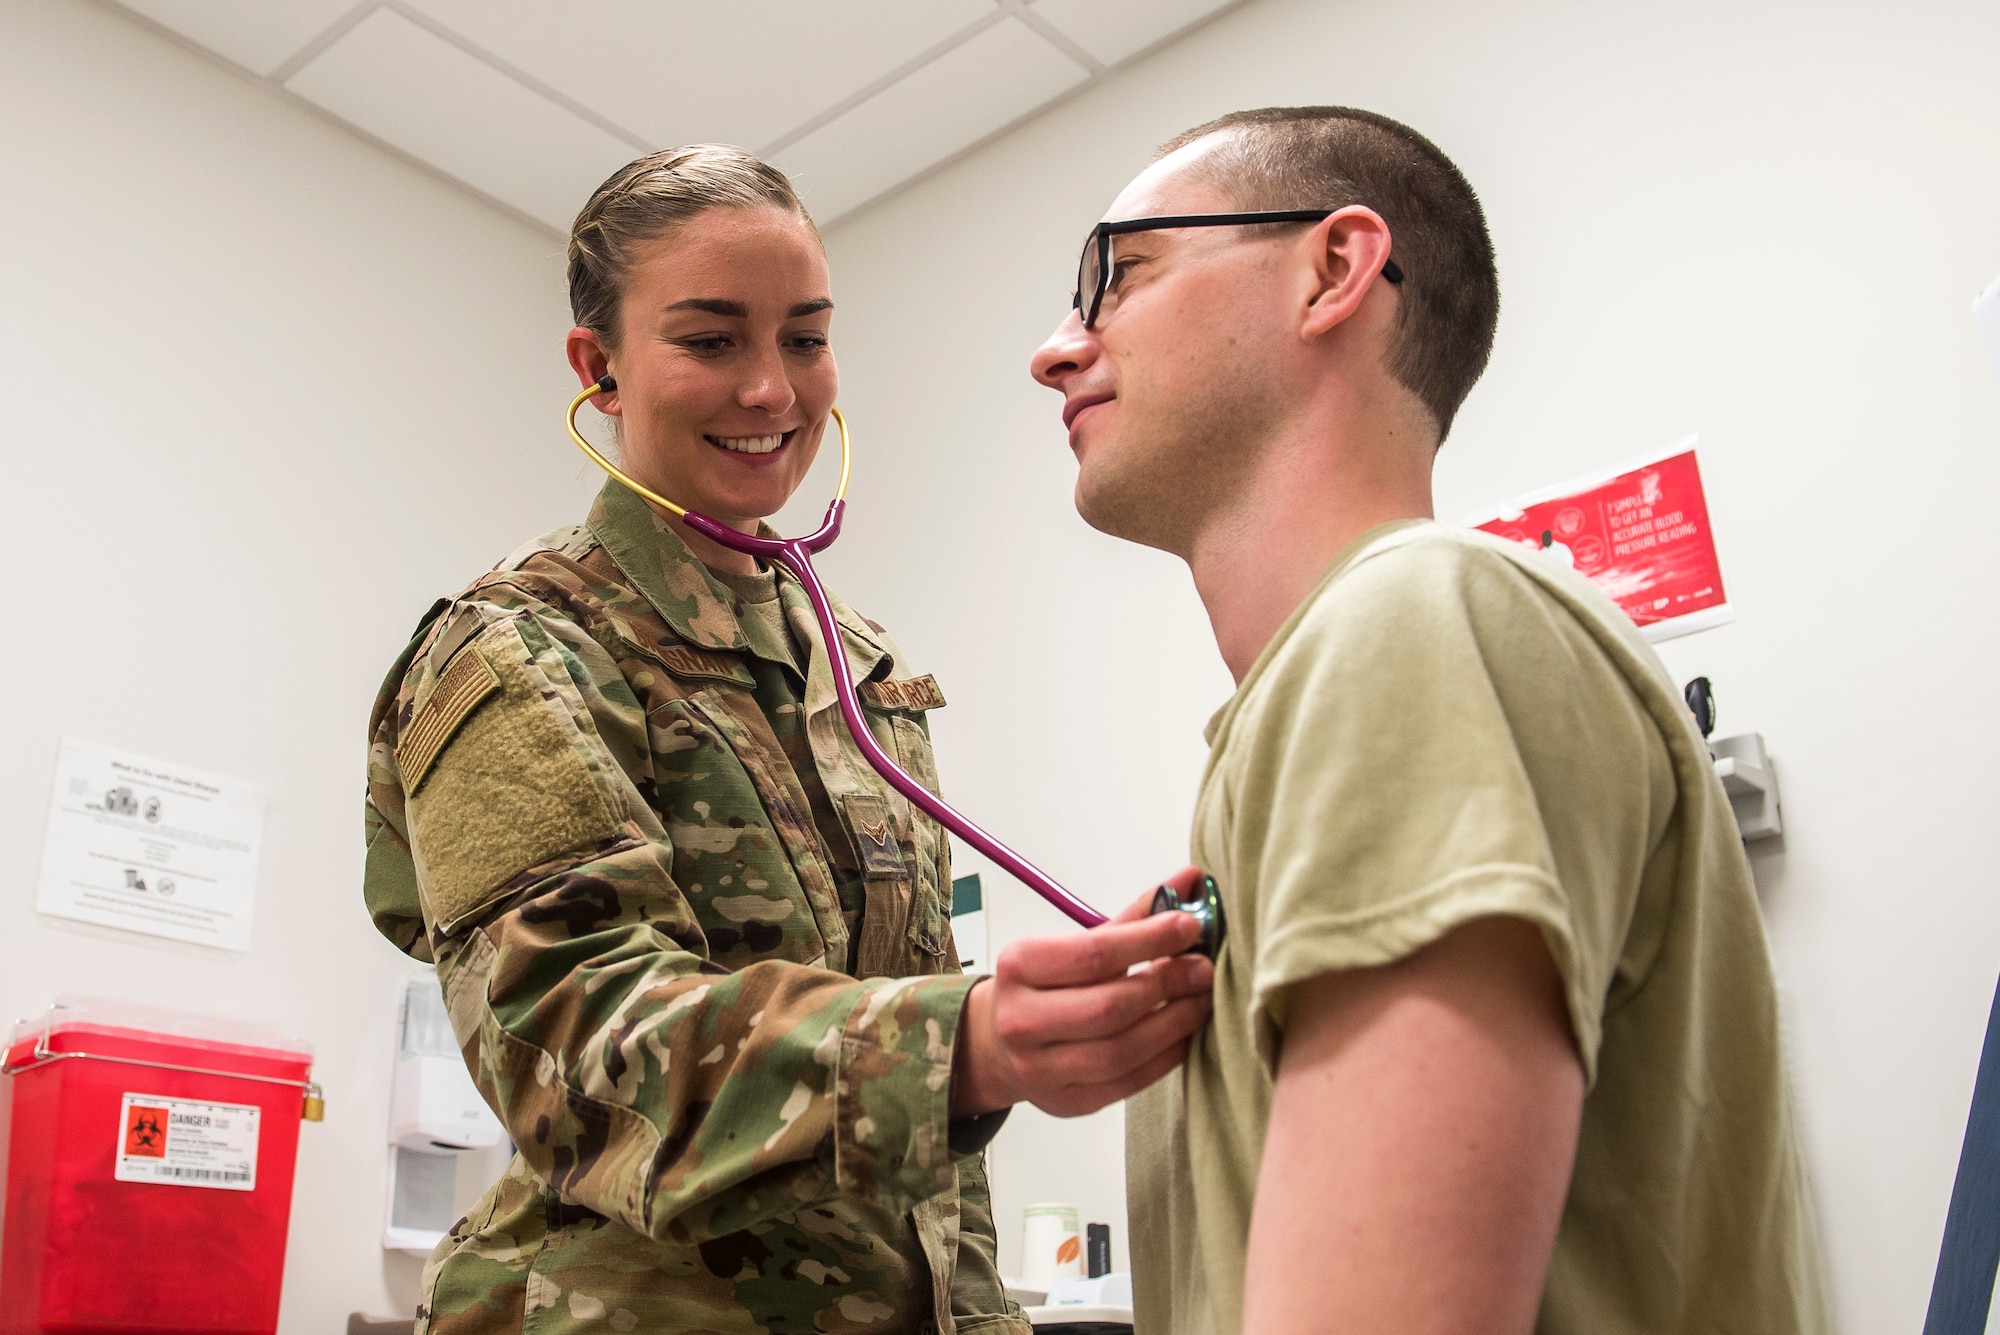 U.S. Air Force Airman 1st Class Sinéad Brosnan, 27th Special Operations Health Care Operations Squadron aerospace medical technician, checks the heart rate of Airman 1st Class Brandon O’Bryant, 27 SOHCOS aerospace medical technician, at Cannon Air Force Base, New Mexico, March 3, 2020. To further her career, Brosnan plans on applying for the Independent Duty Medical Technician program to become a Special Operations Forces Medical Element member. (U.S. Air Force photo by Senior Airman Vernon R. Walter III)